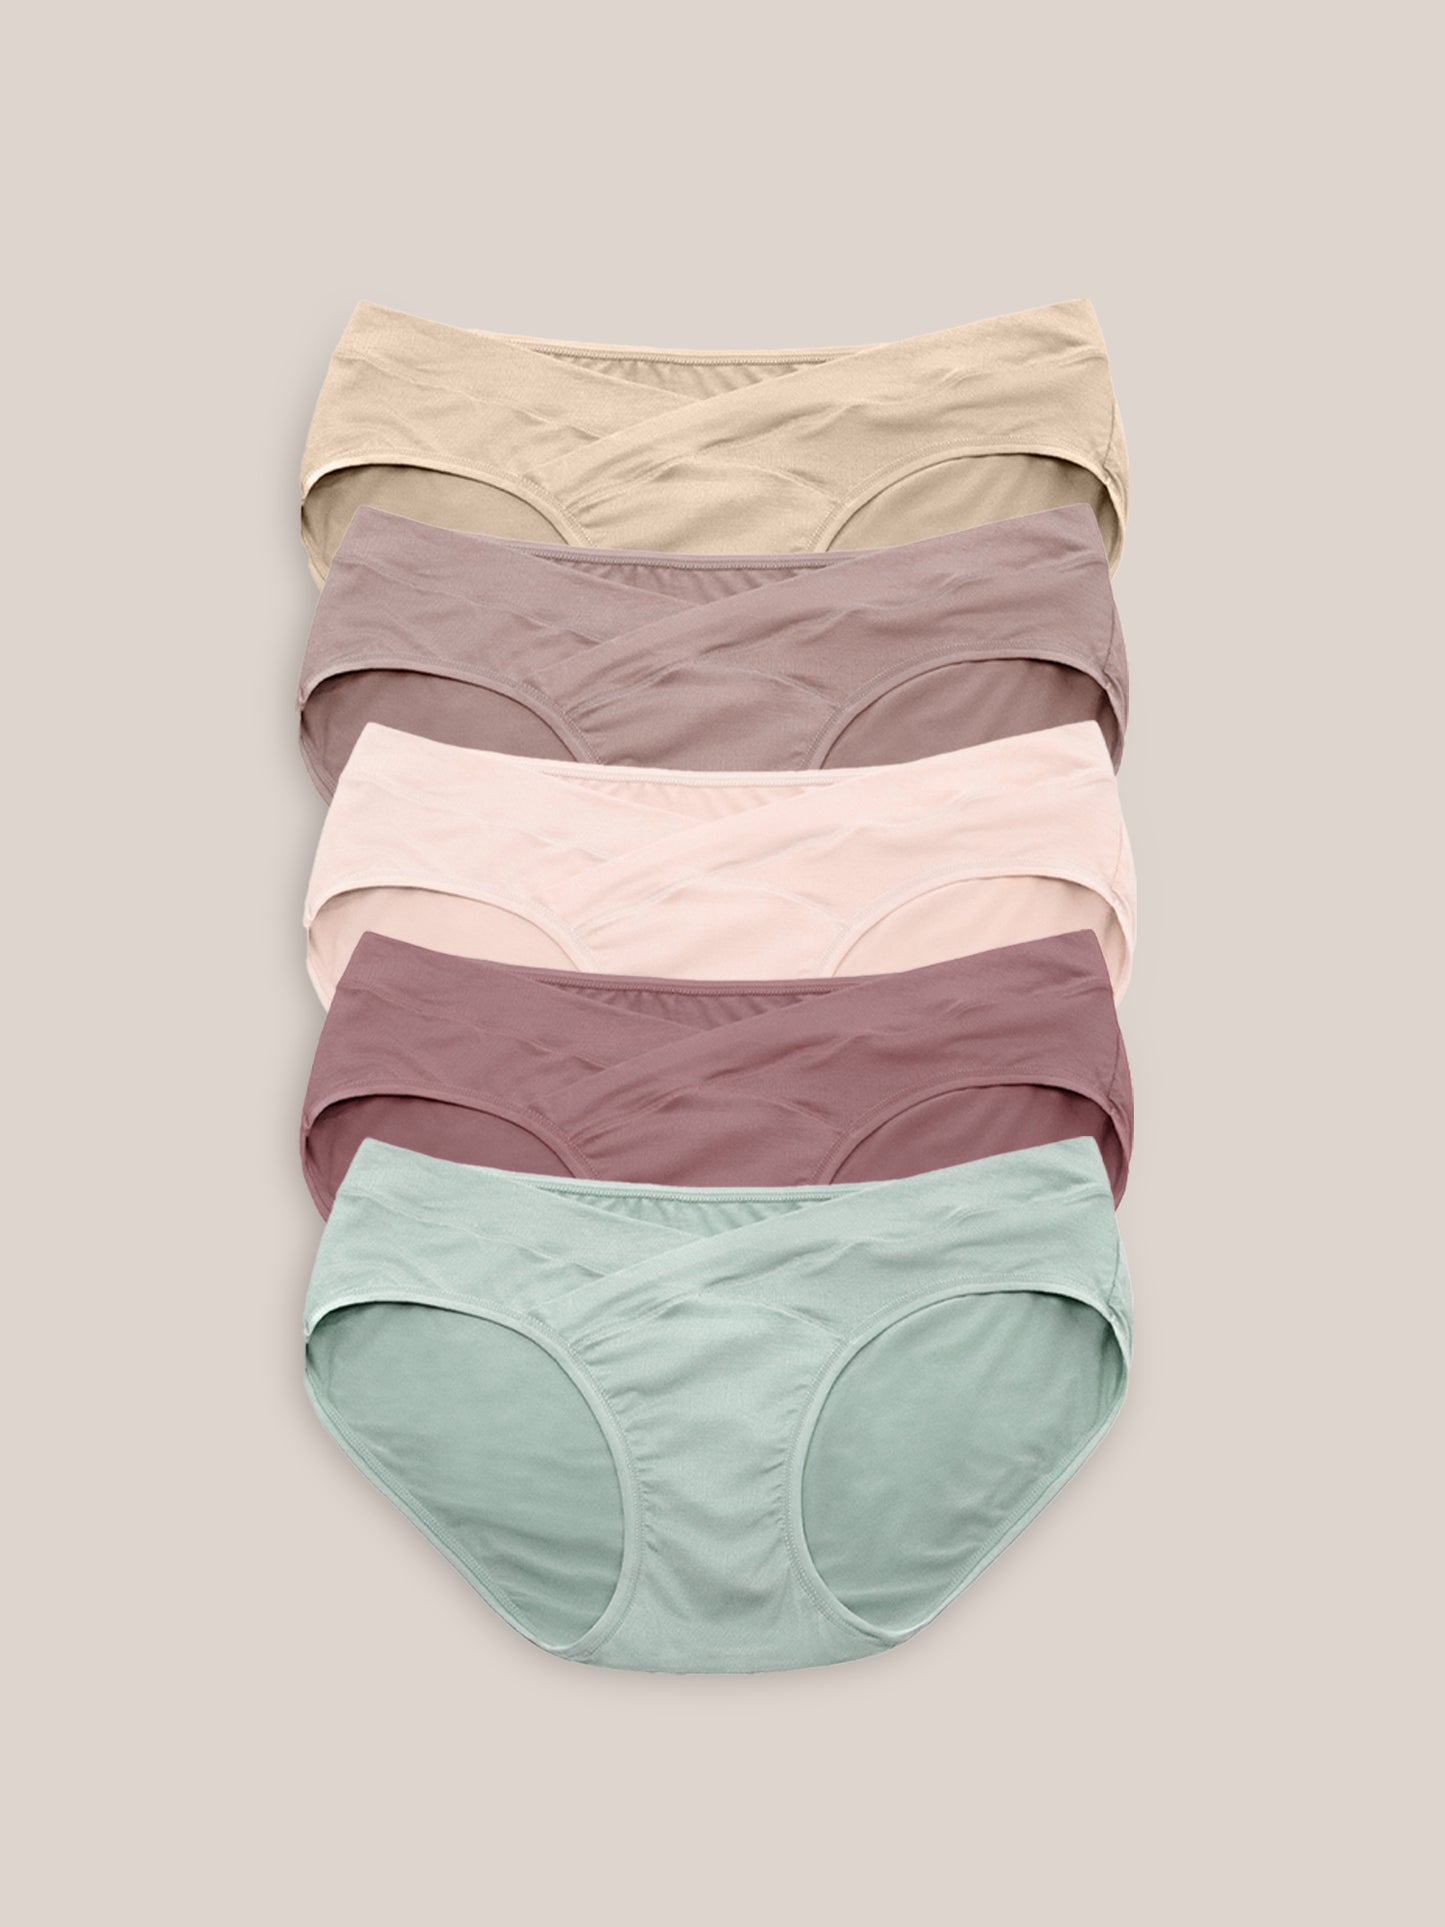 Kindred Bravely Under The Bump Maternity Underwear/Pregnancy - Import It All